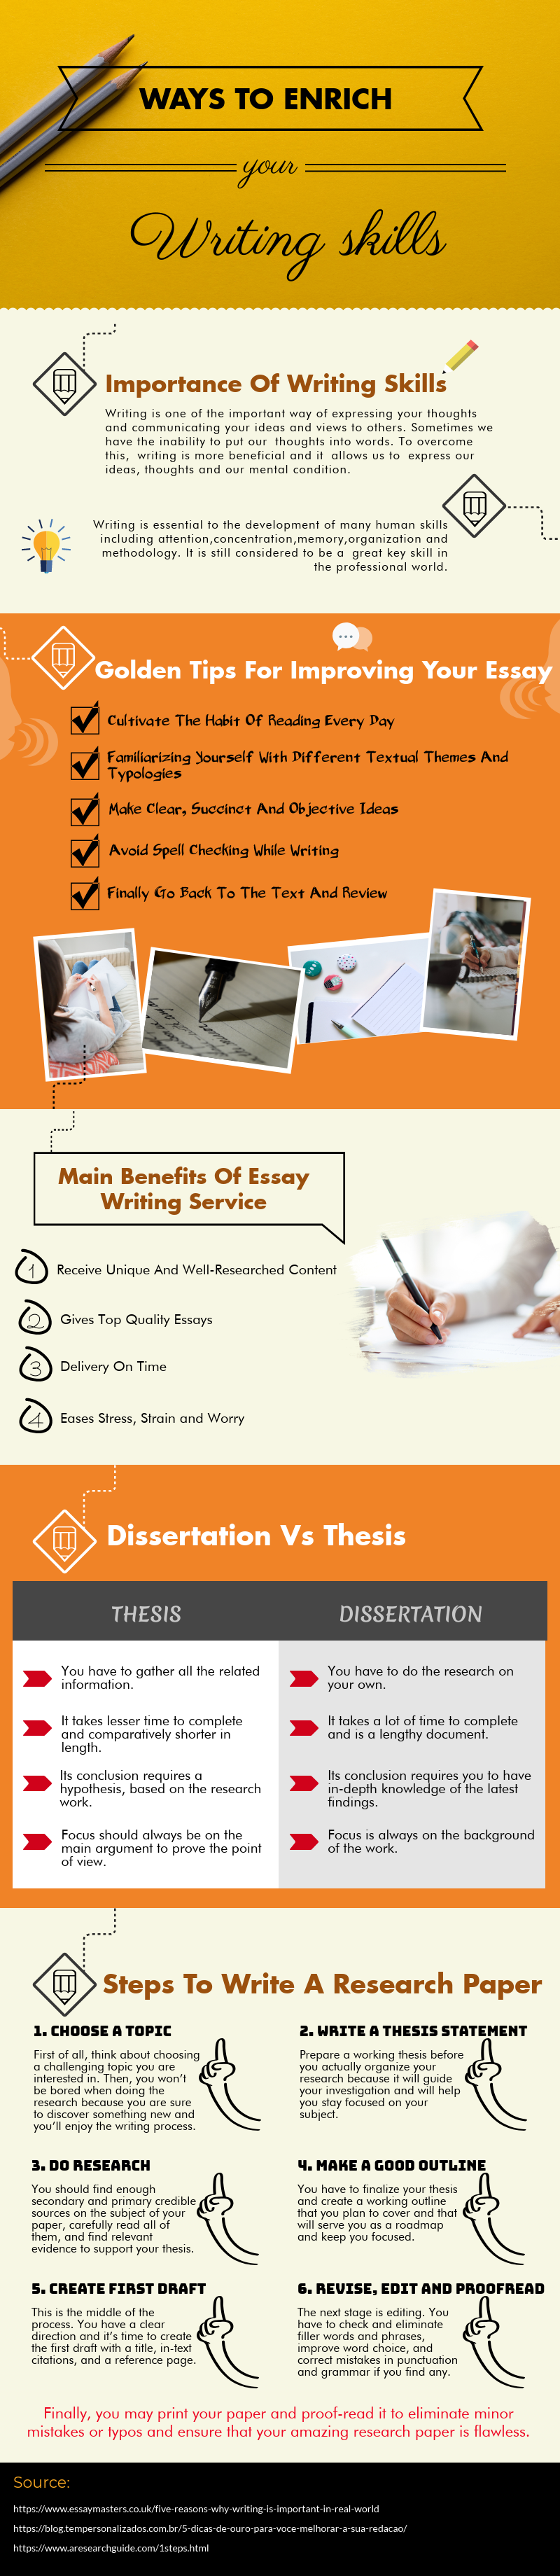 Tips for Writing the Introduction of an Essay #infographic